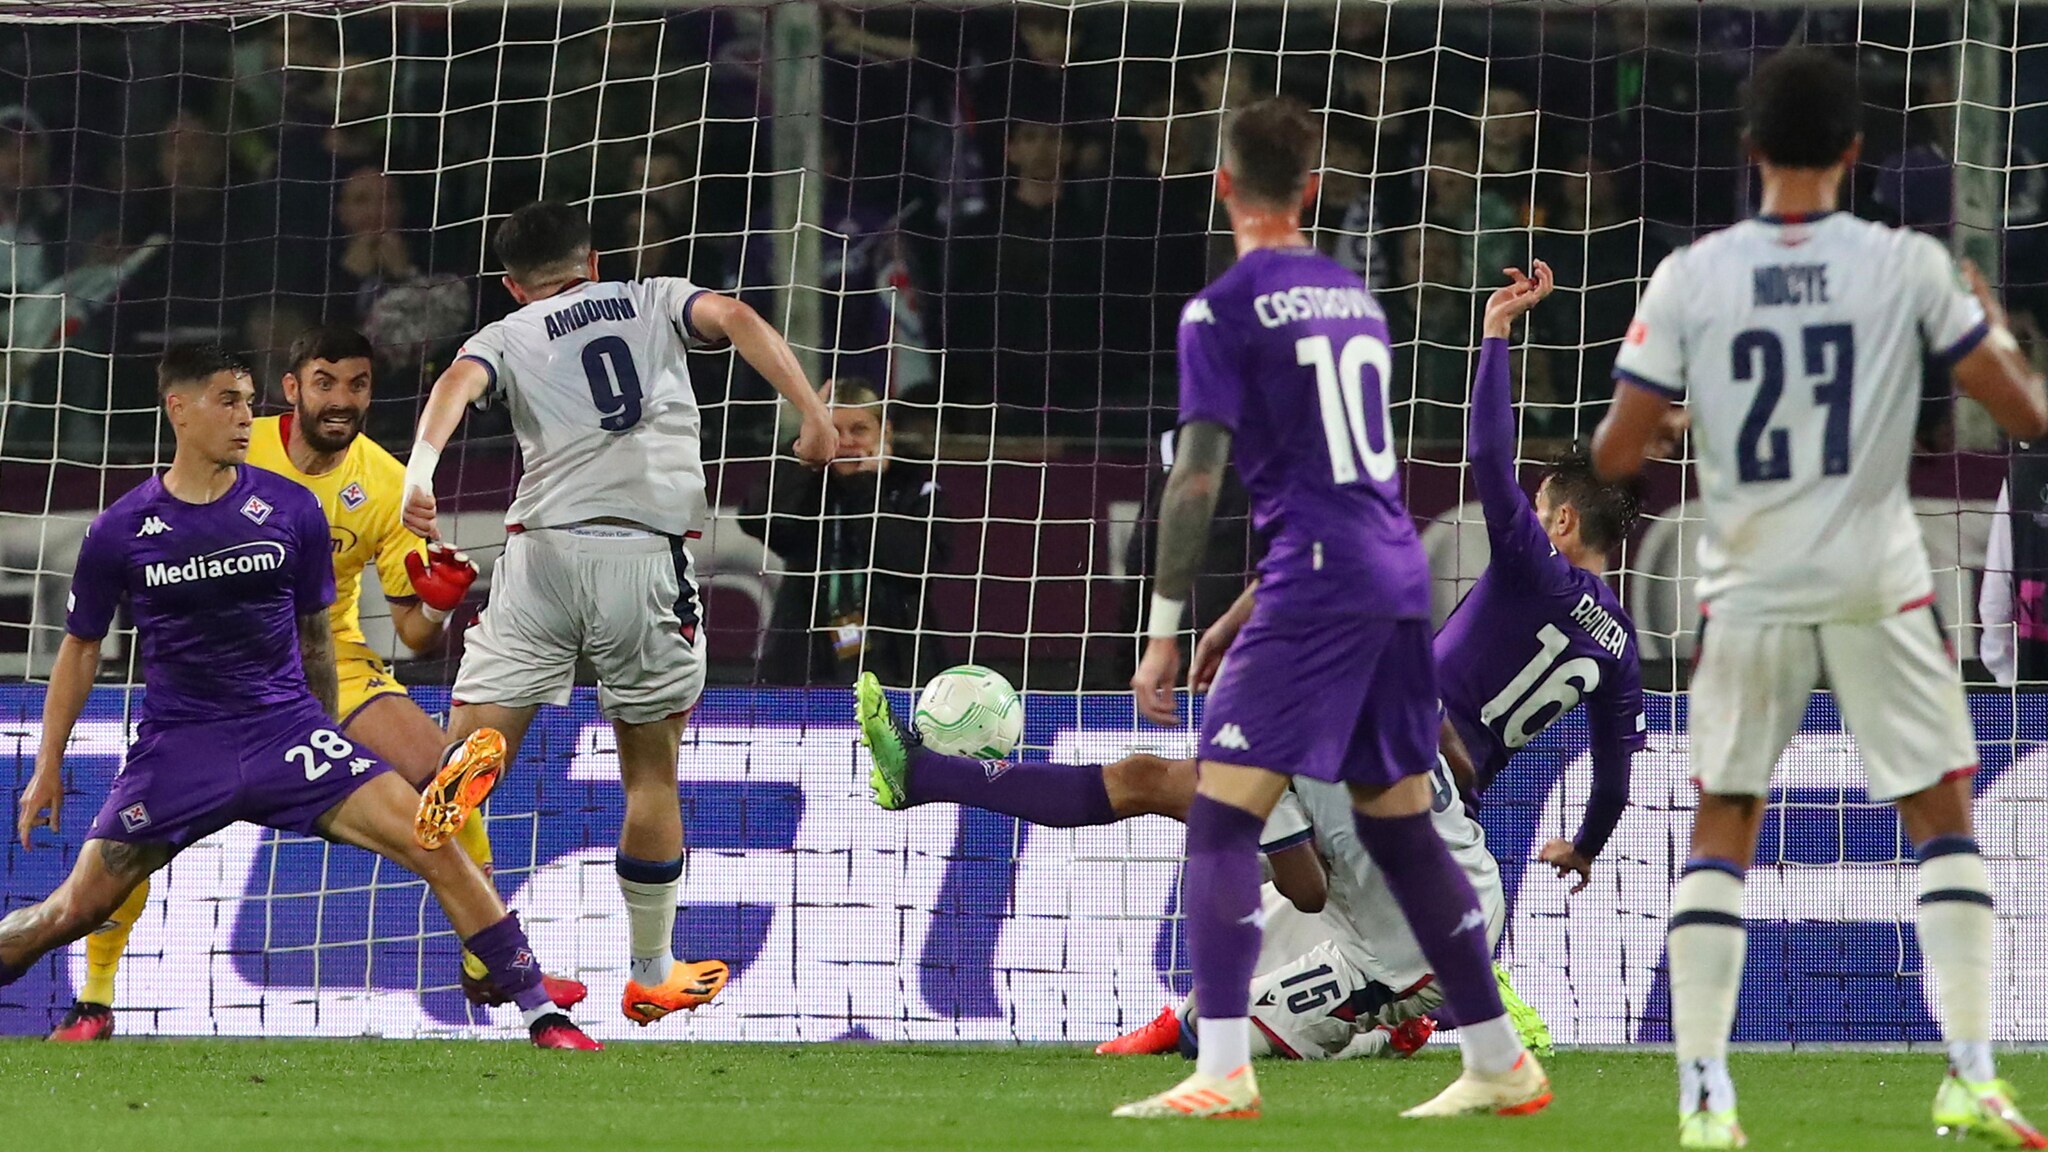 Fiorentina failed to take advantage of their lead, ultimately losing 2-1 to Basel in their Europa Conference League semifinal first leg